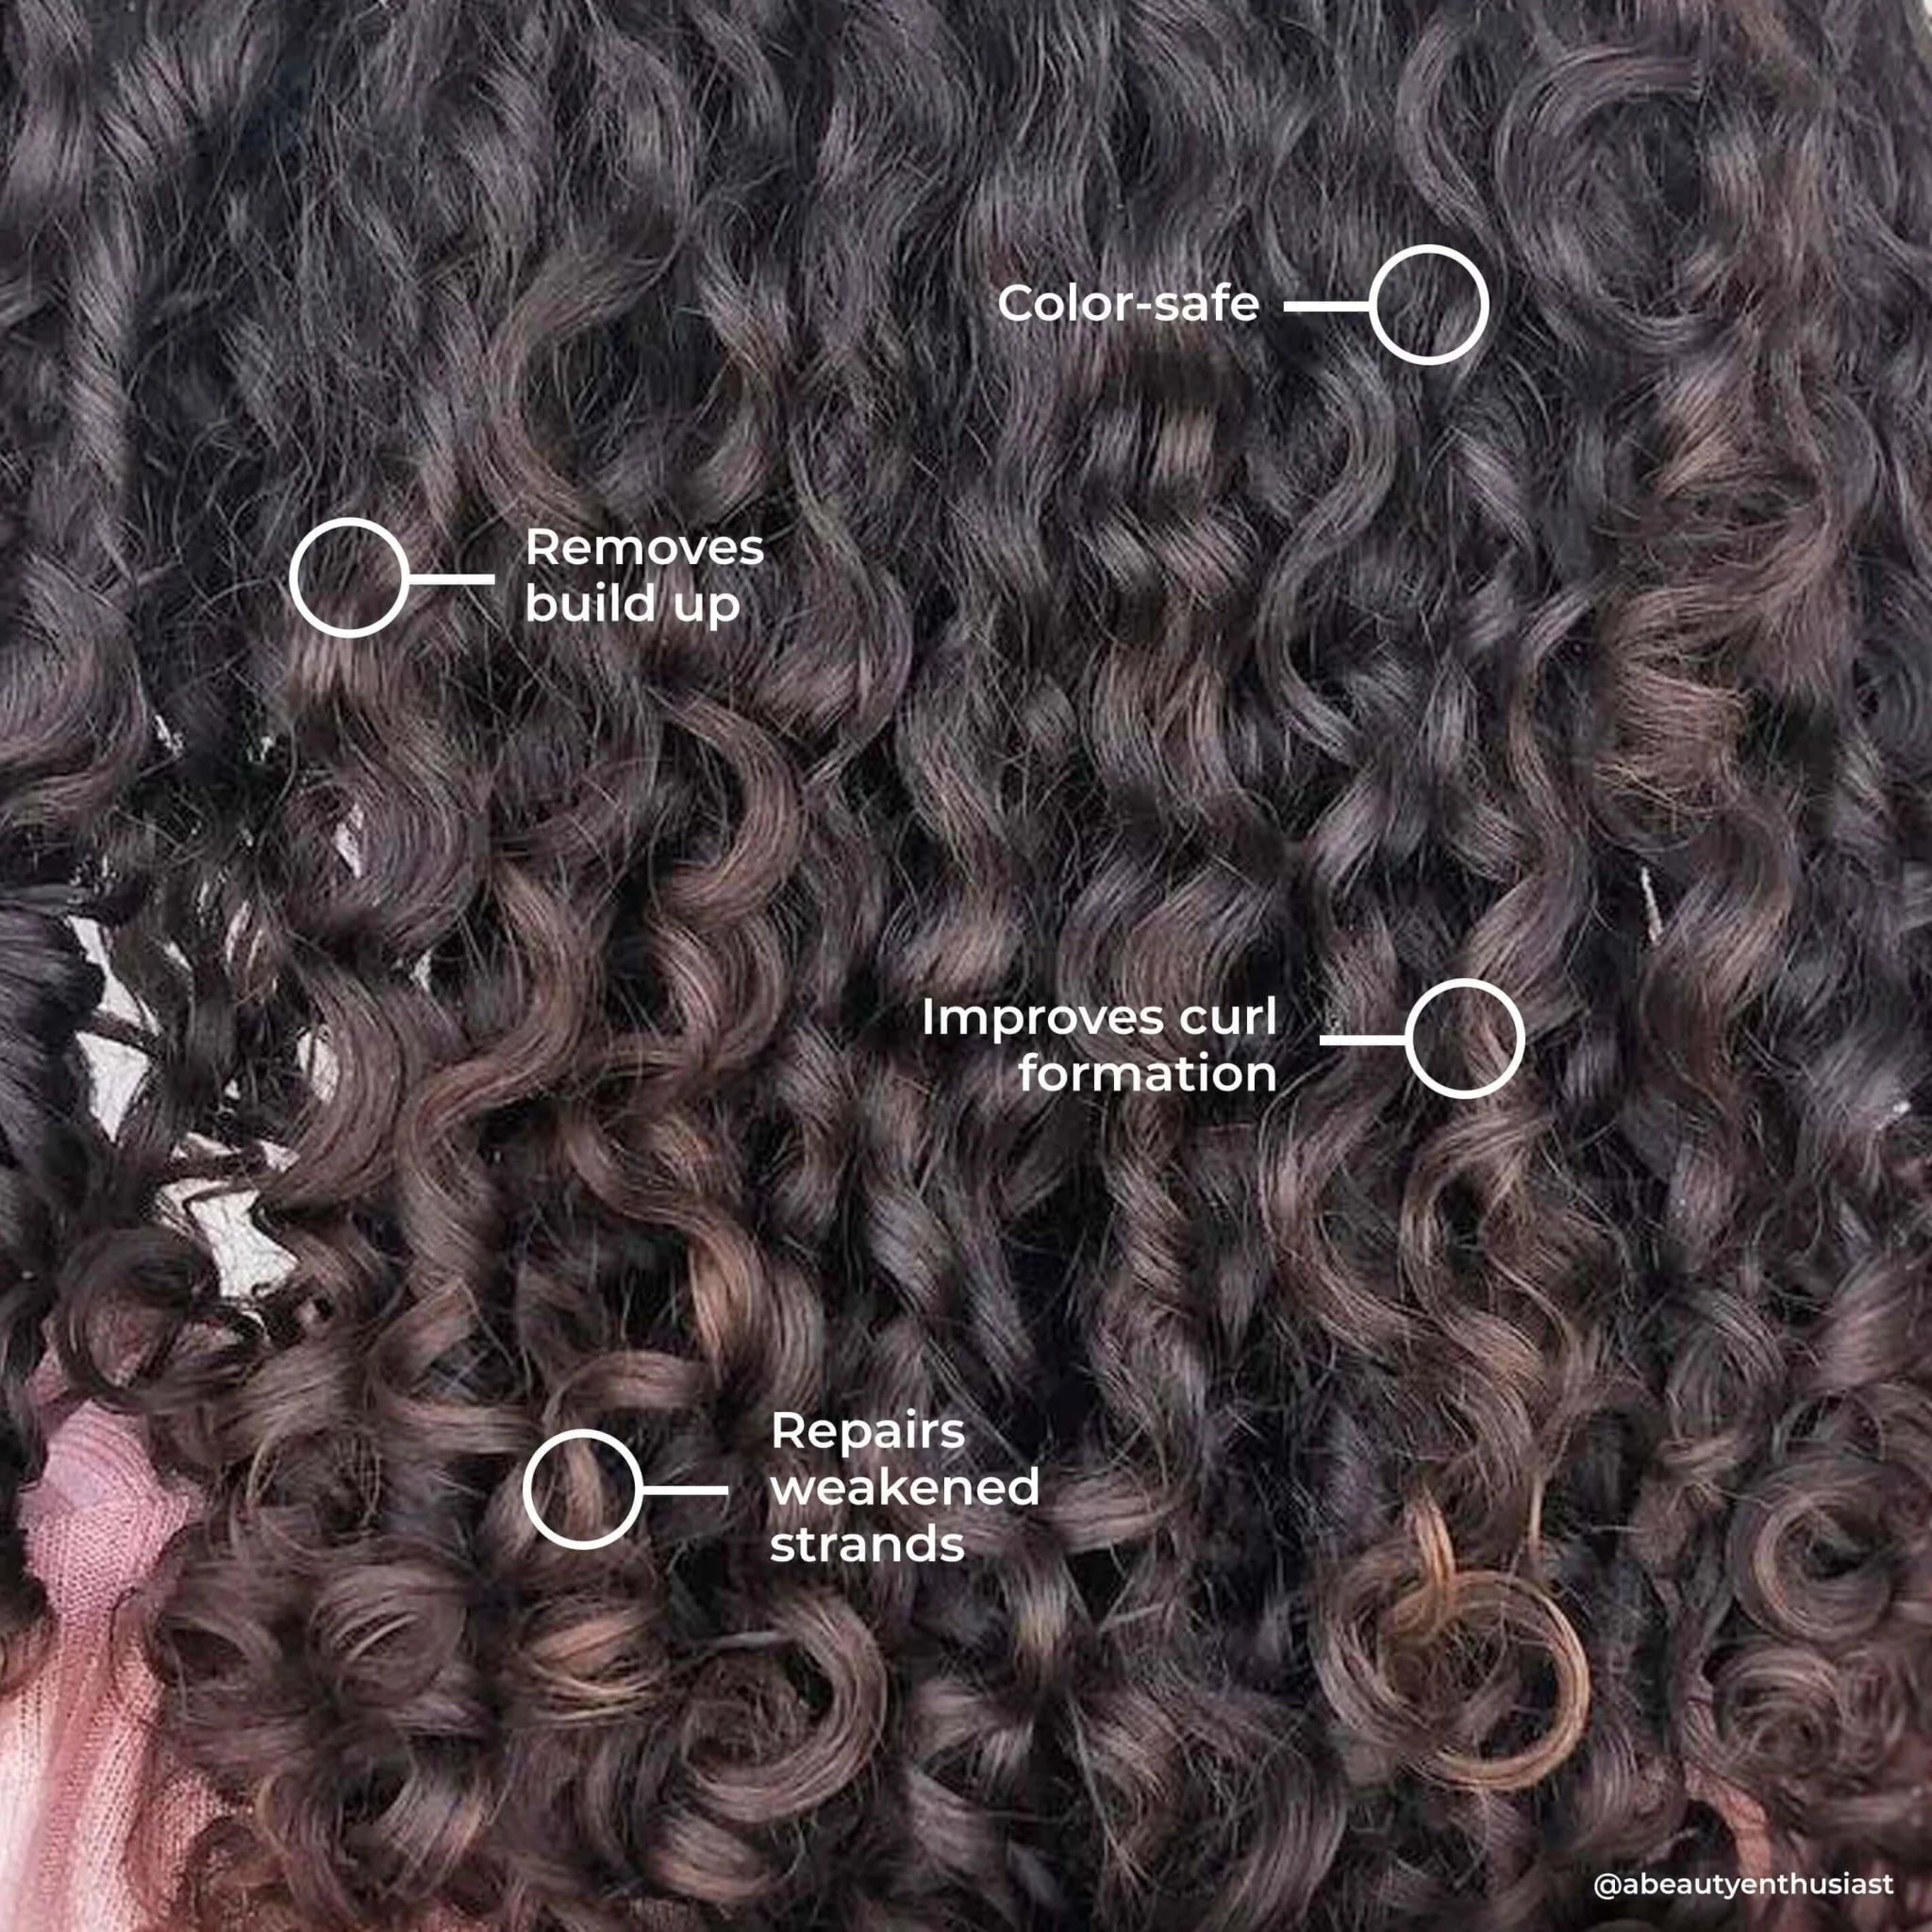 Close-up of hydrated curls with labels pointing to sections, describing attributes: color-safe, gently removes build-up, improves curl formation, and repairs weakened strands. Product: Leaf and Flower Instant Curl Refresh Shampoo by Leaf and Flower.